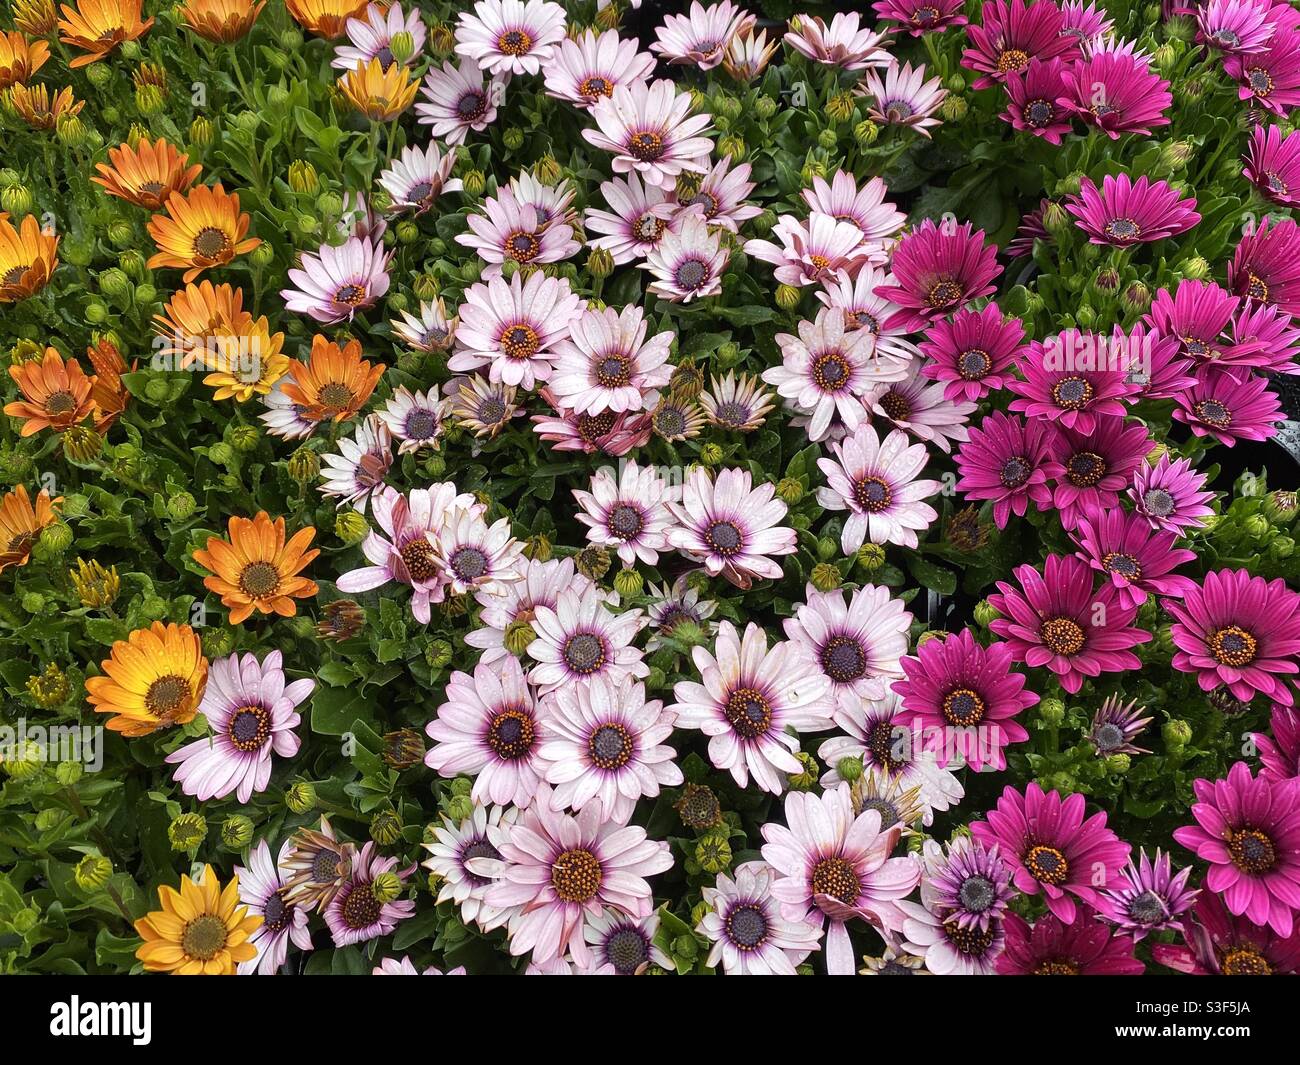 Colourful display of beautiful summer flowers in the garden Stock Photo